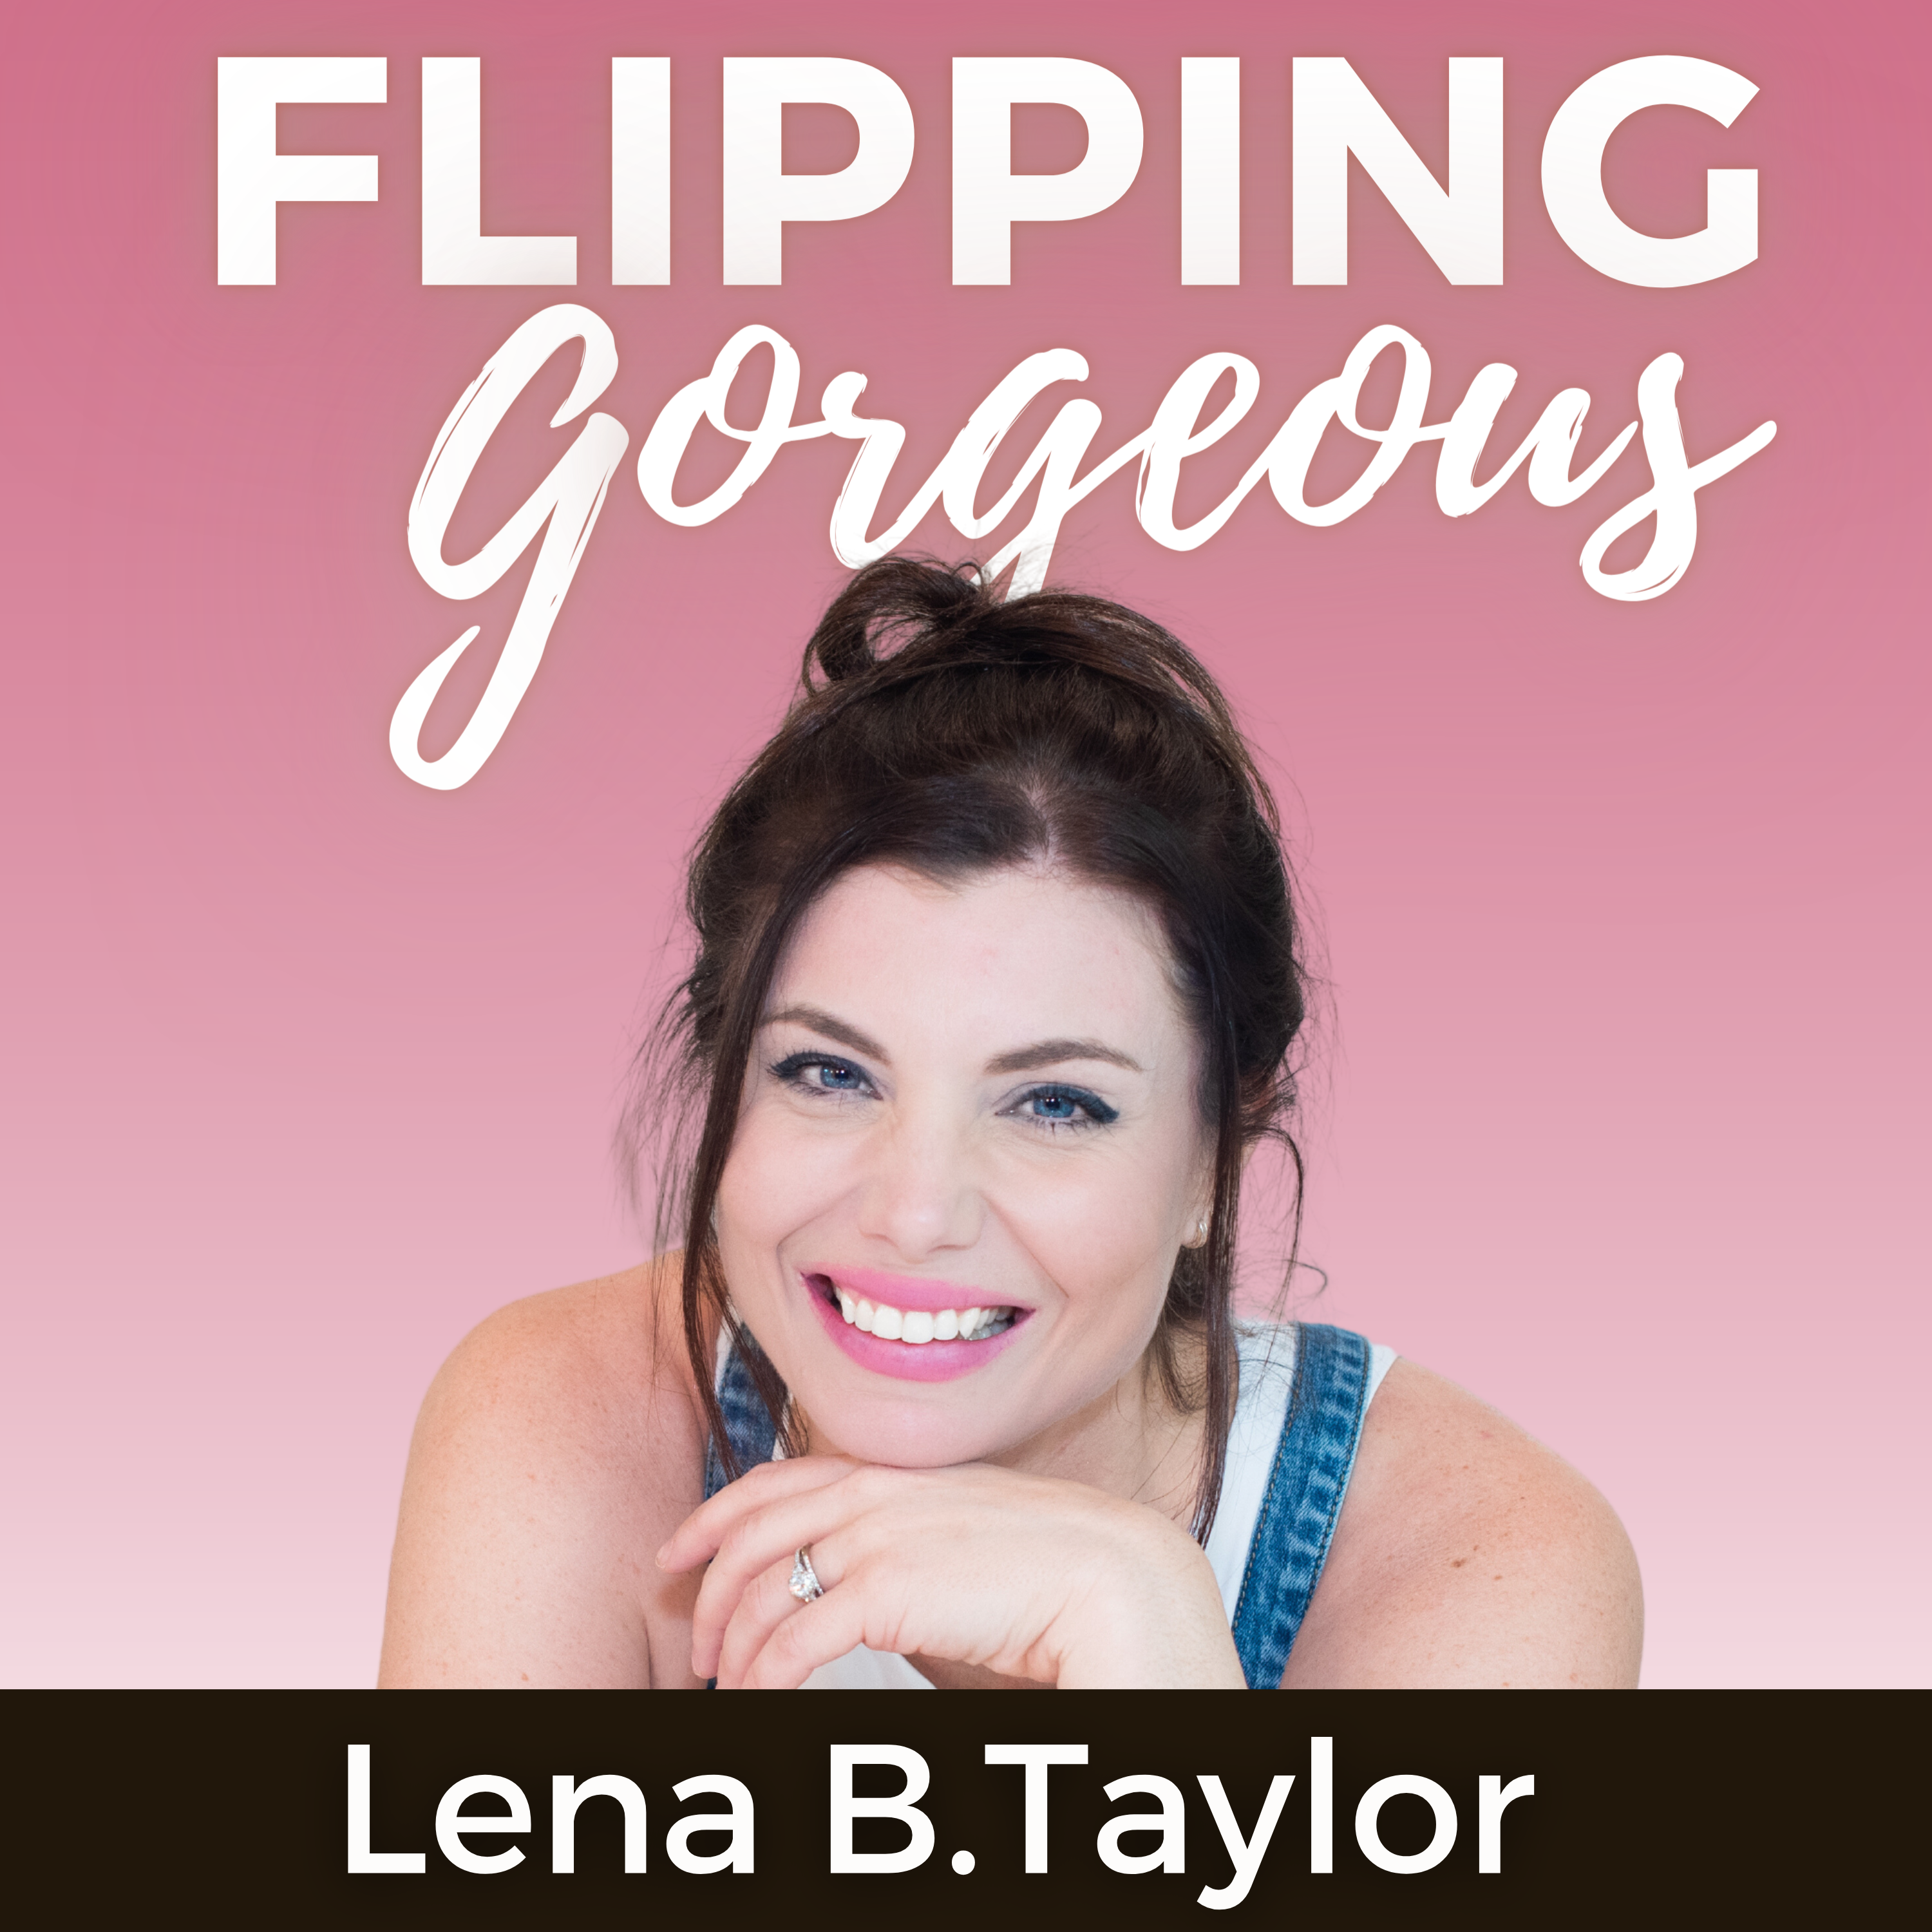 Copy of Flipping gorgeous (2)